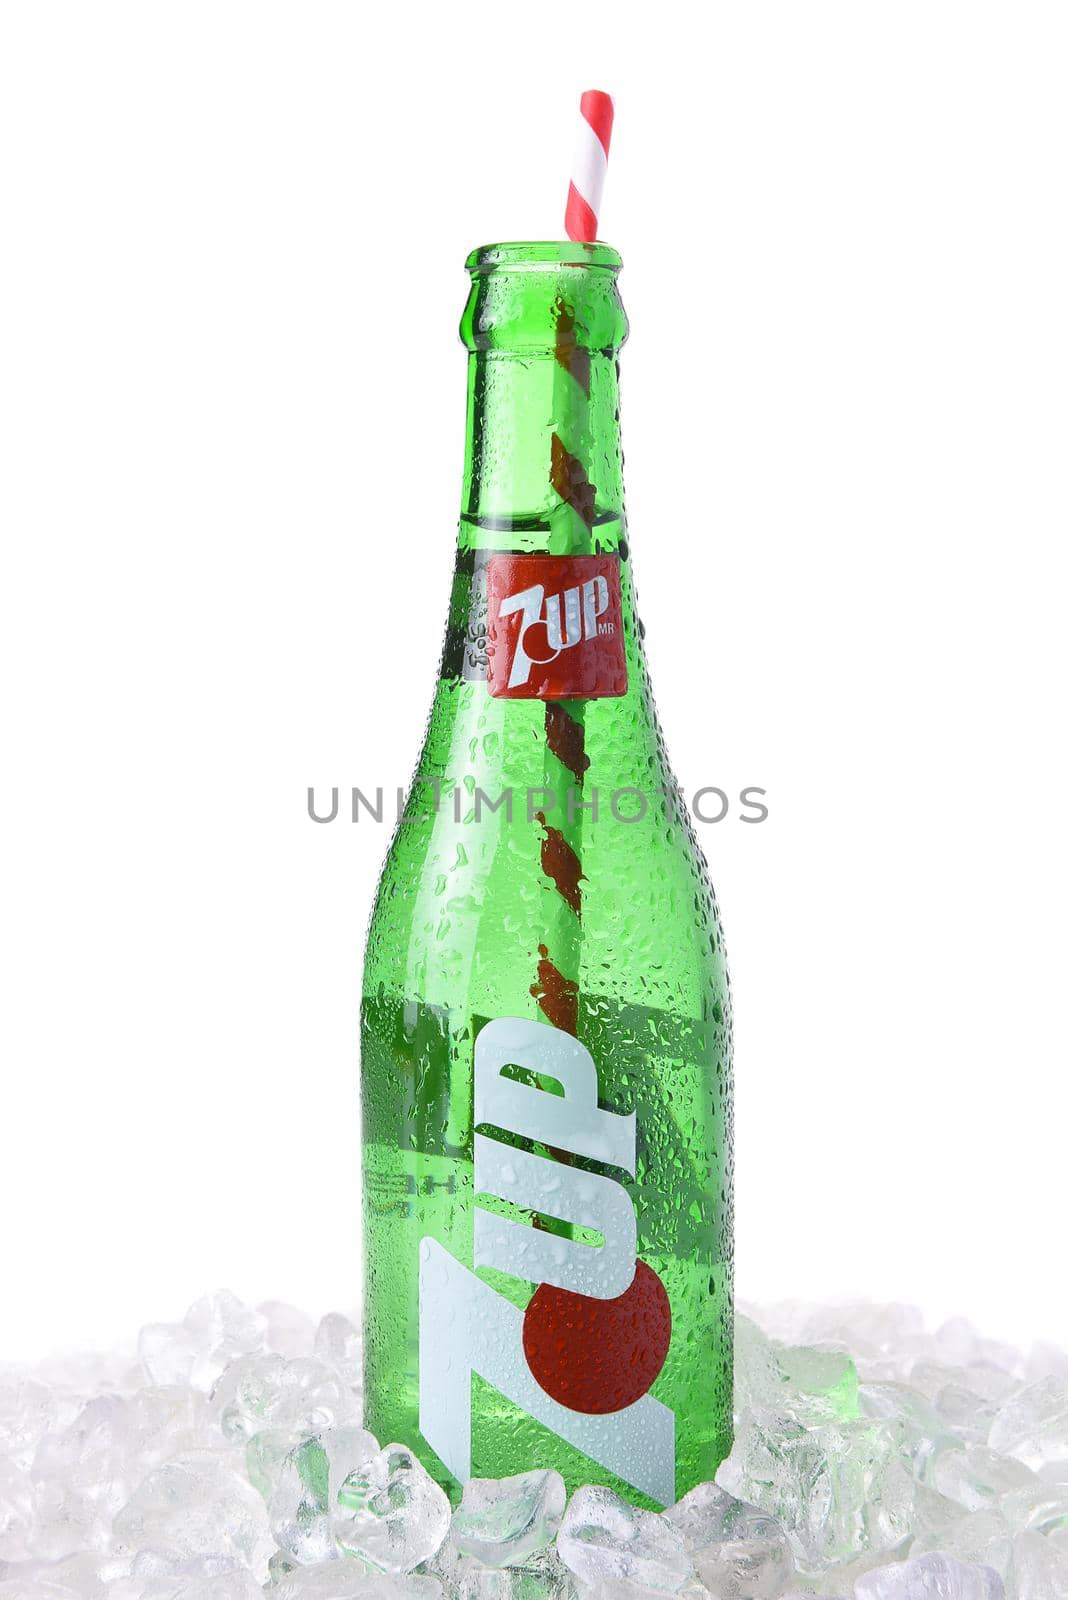 IRVINE, CA - MARCH 12, 2018: A glass 7-Up bottle. A lemon-lime flavored, non-caffeinated soft drink. The rights to the brand are held by Dr Pepper Snapple Group in the USA, and PepsiCo elsewhere. 